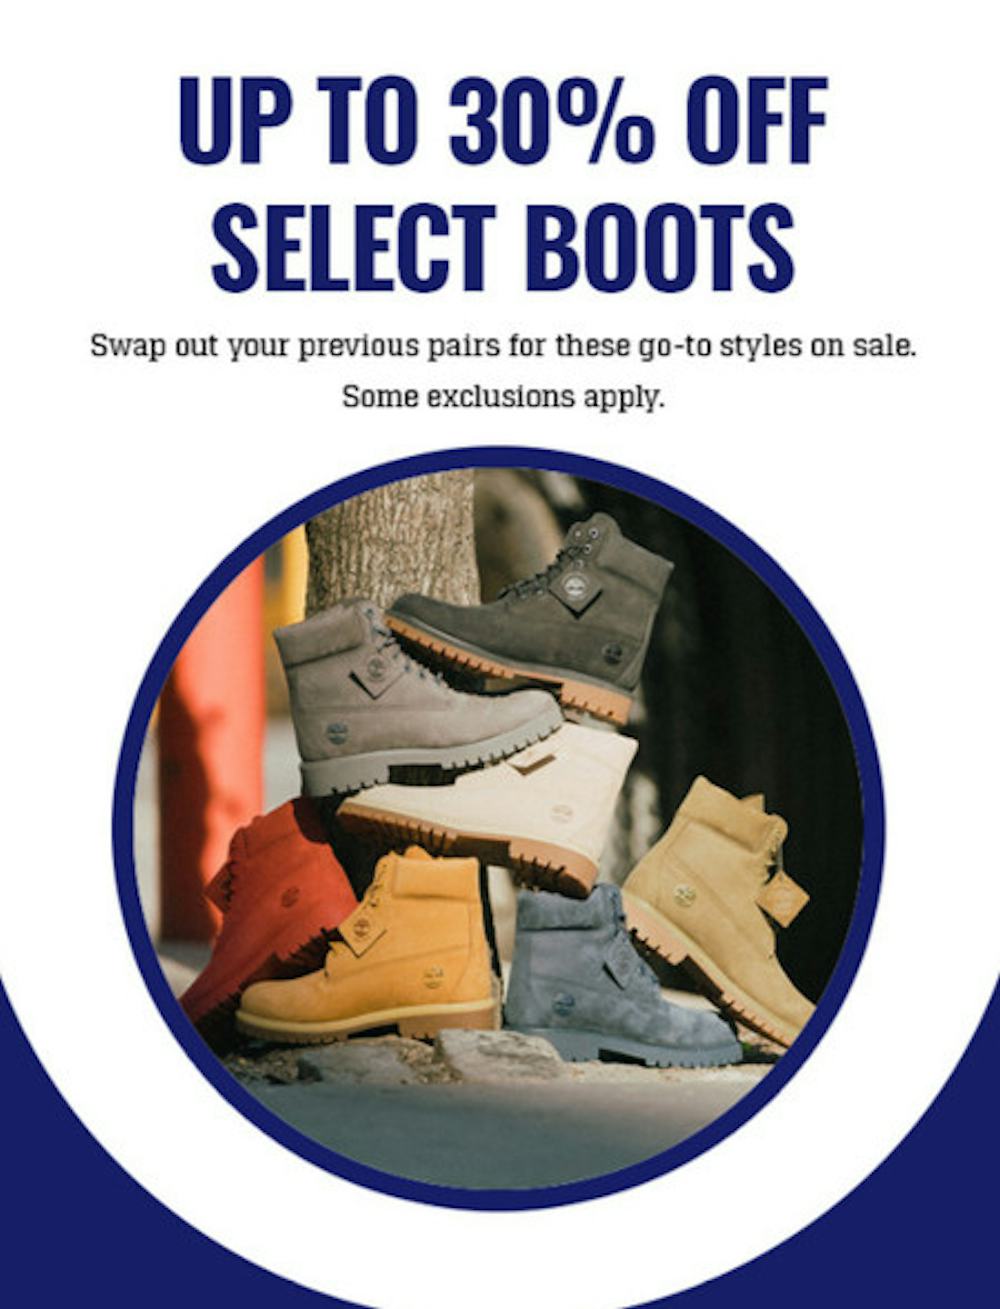 Up to 30% Off Select Boots